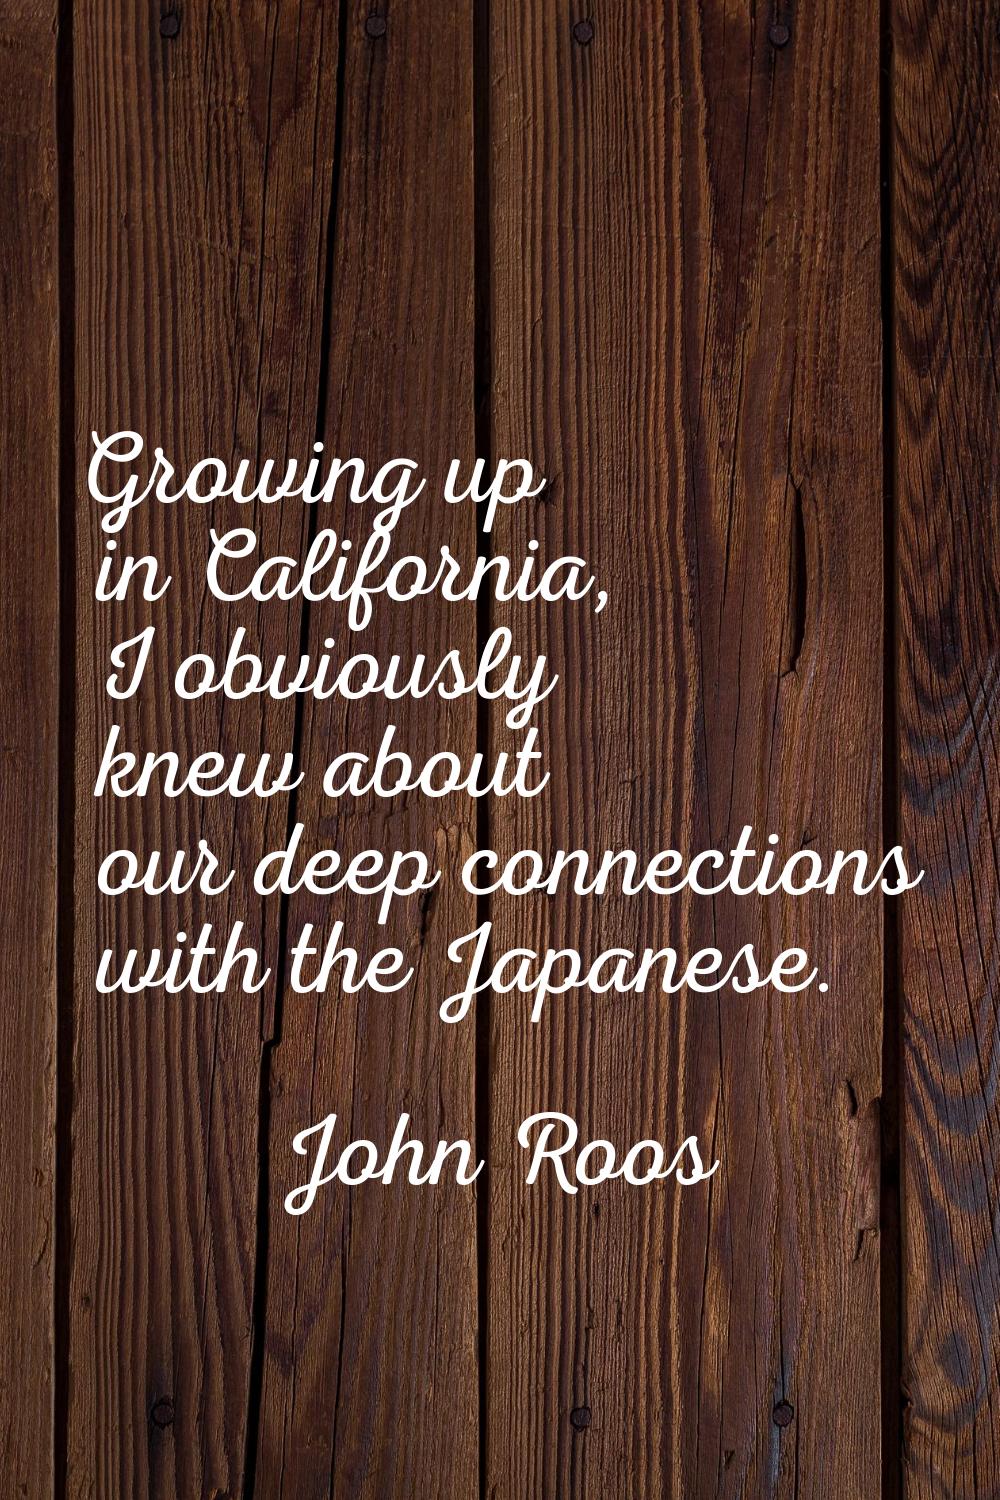 Growing up in California, I obviously knew about our deep connections with the Japanese.